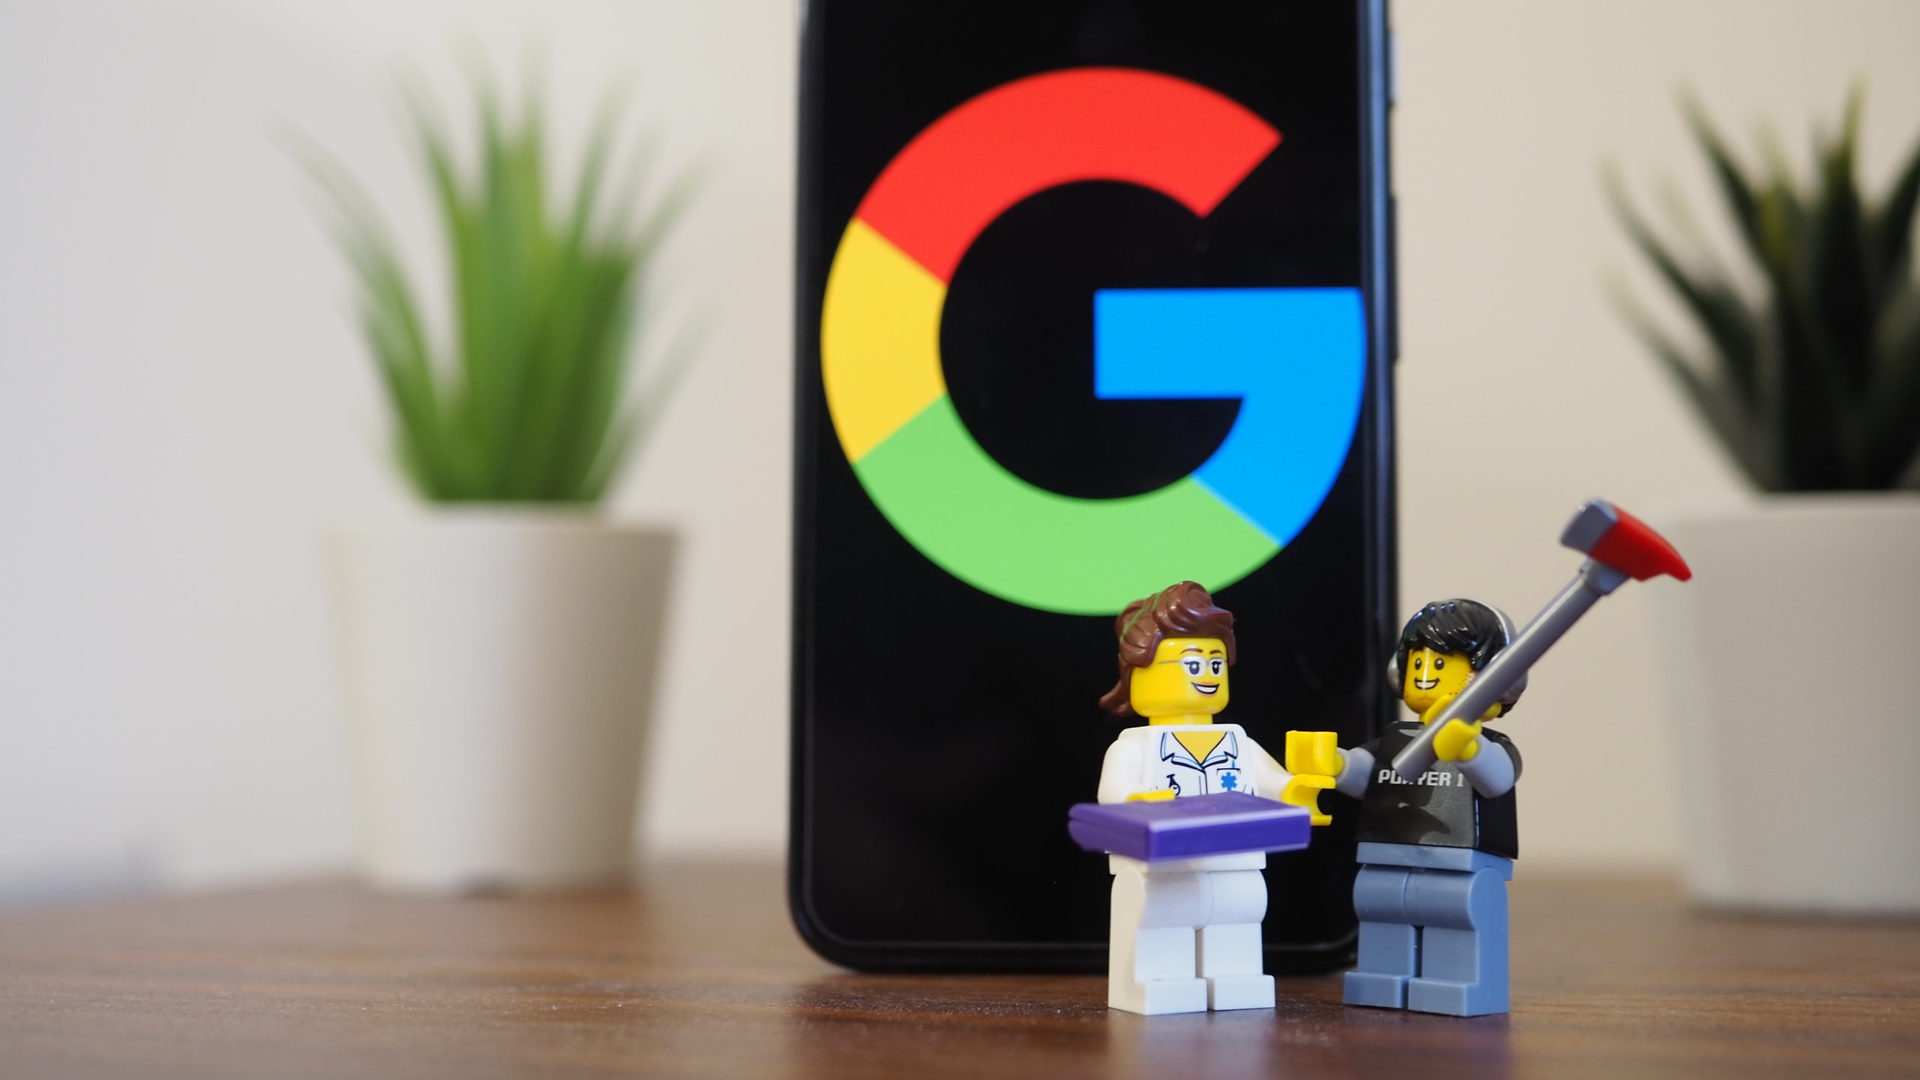 Google Pixel 5 on a table showing Google logo with two lego figurines in front of it